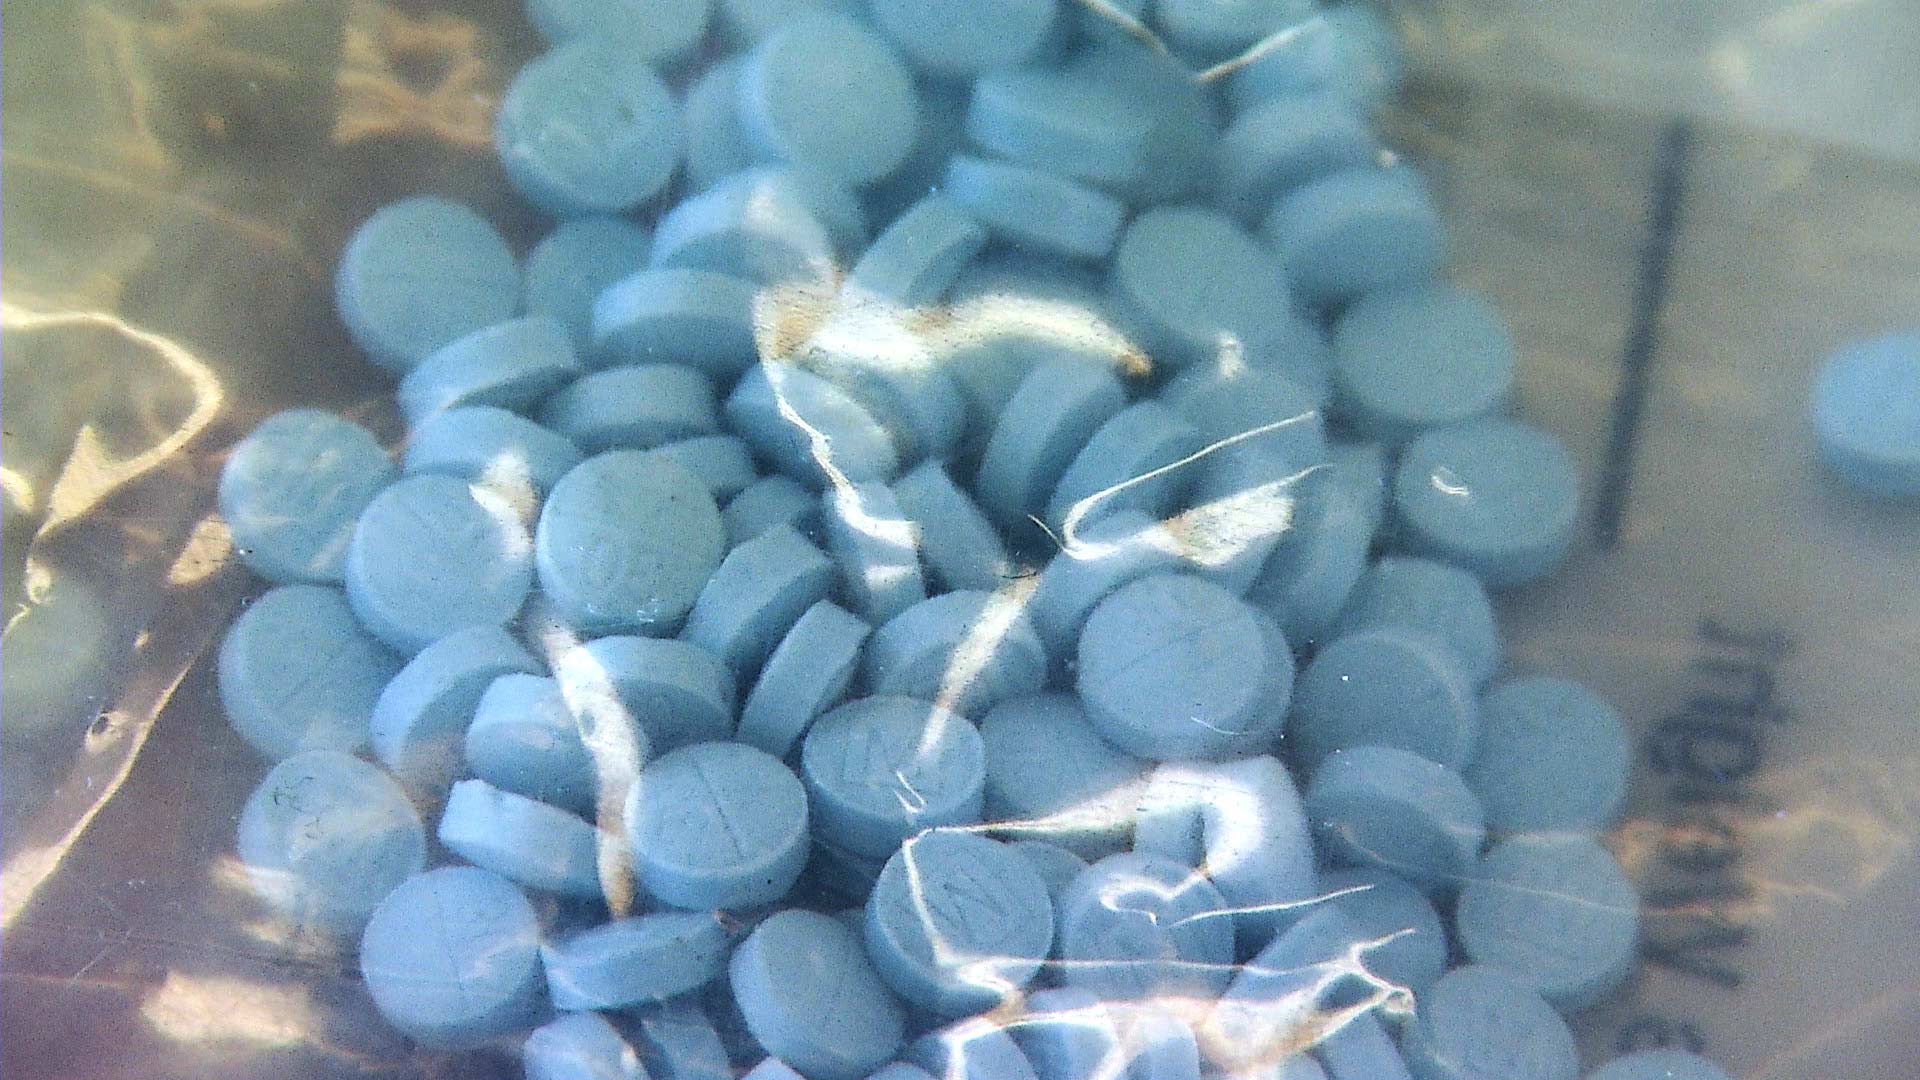 File image of fentanyl pills seized by the Pima County Sheriff's Department. 2019. 